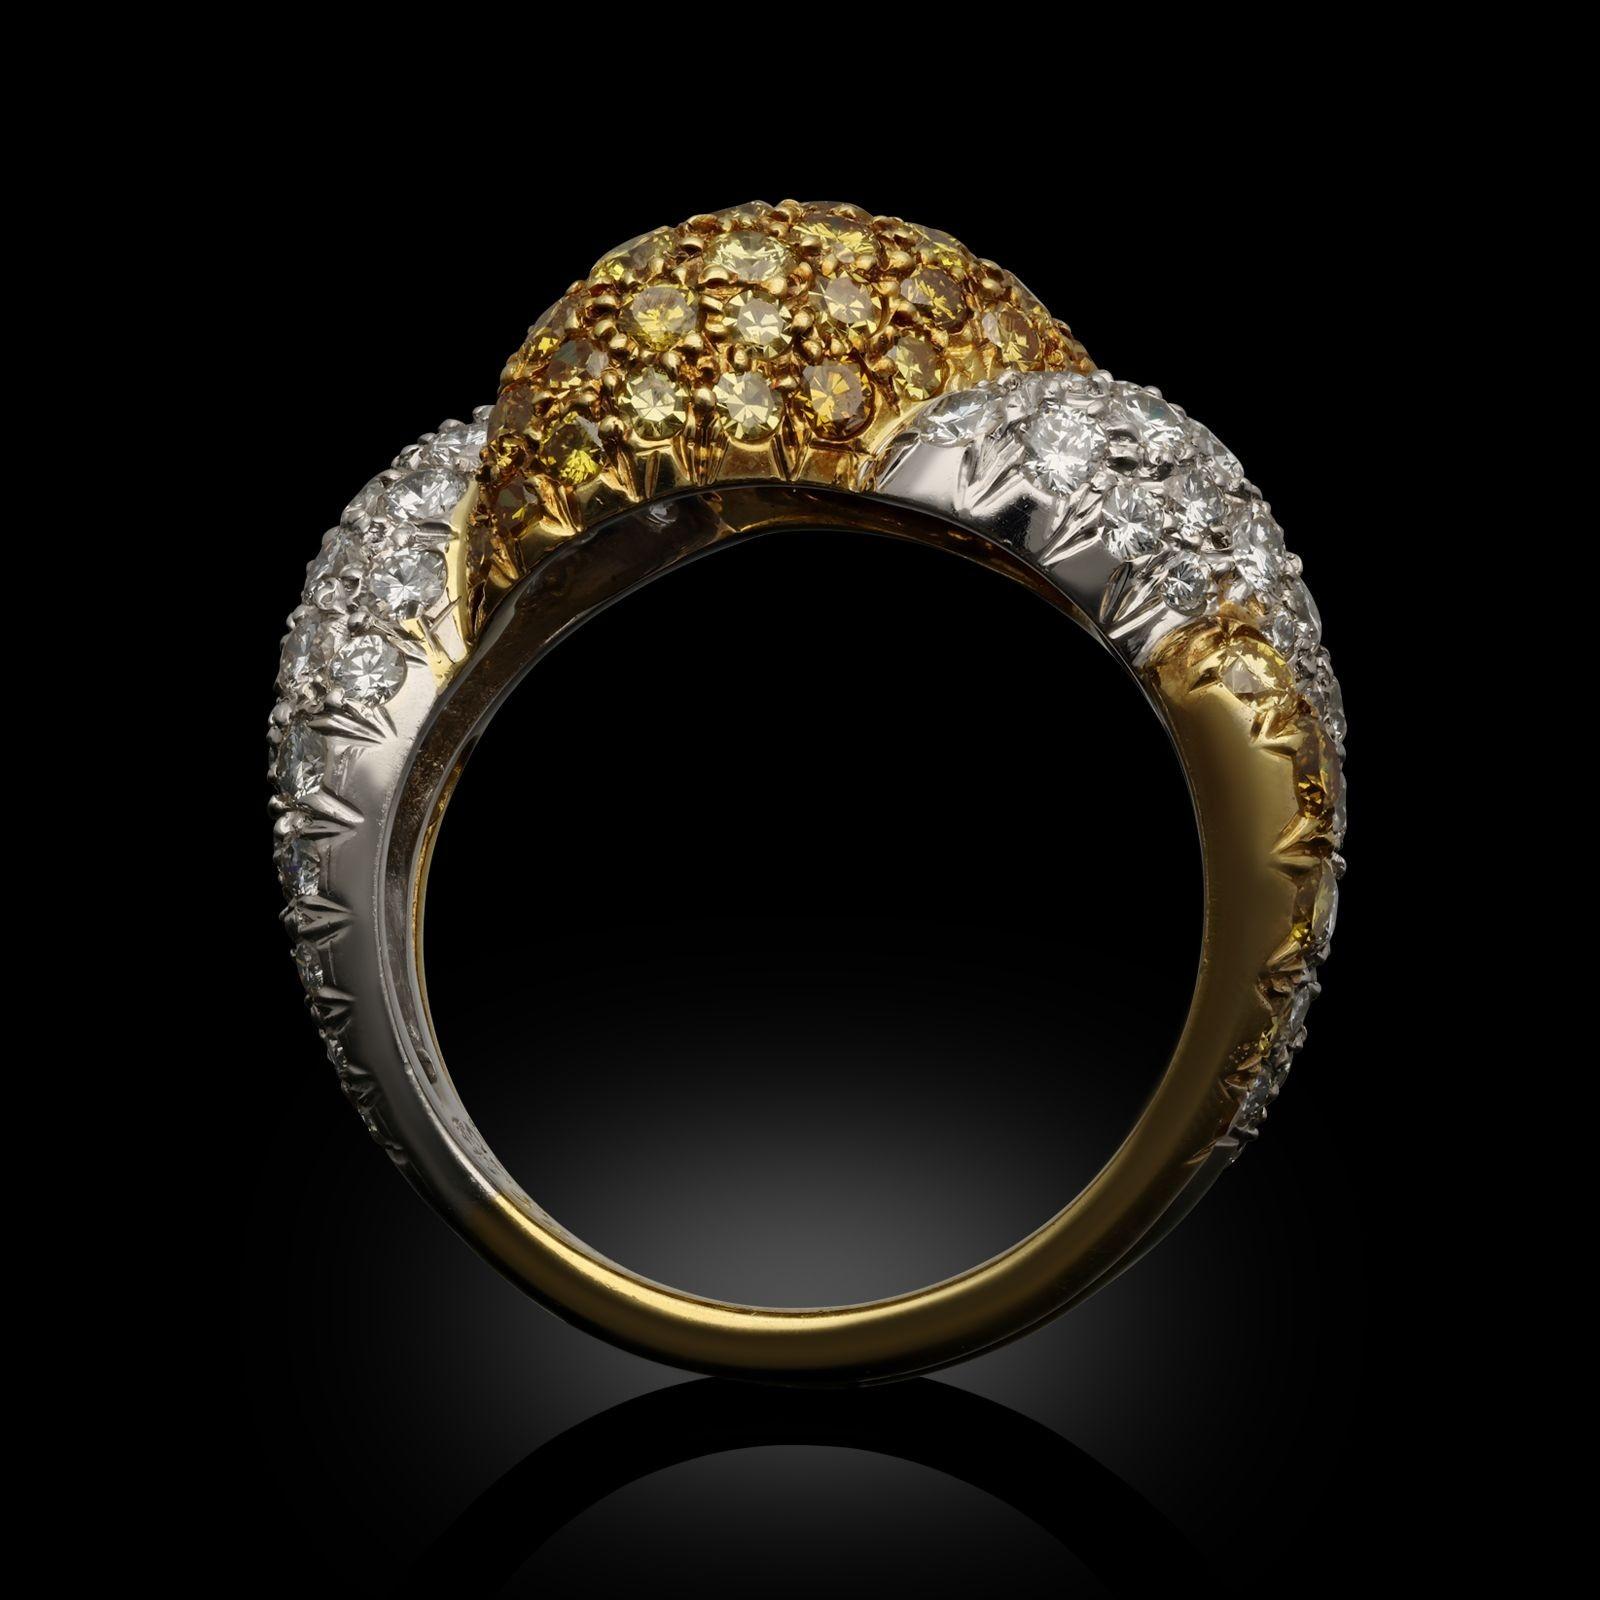 Van Cleef & Arpels Pavé Set Yellow And White Diamond Bombe Dress Ring Cira 1980 In Good Condition For Sale In London, GB